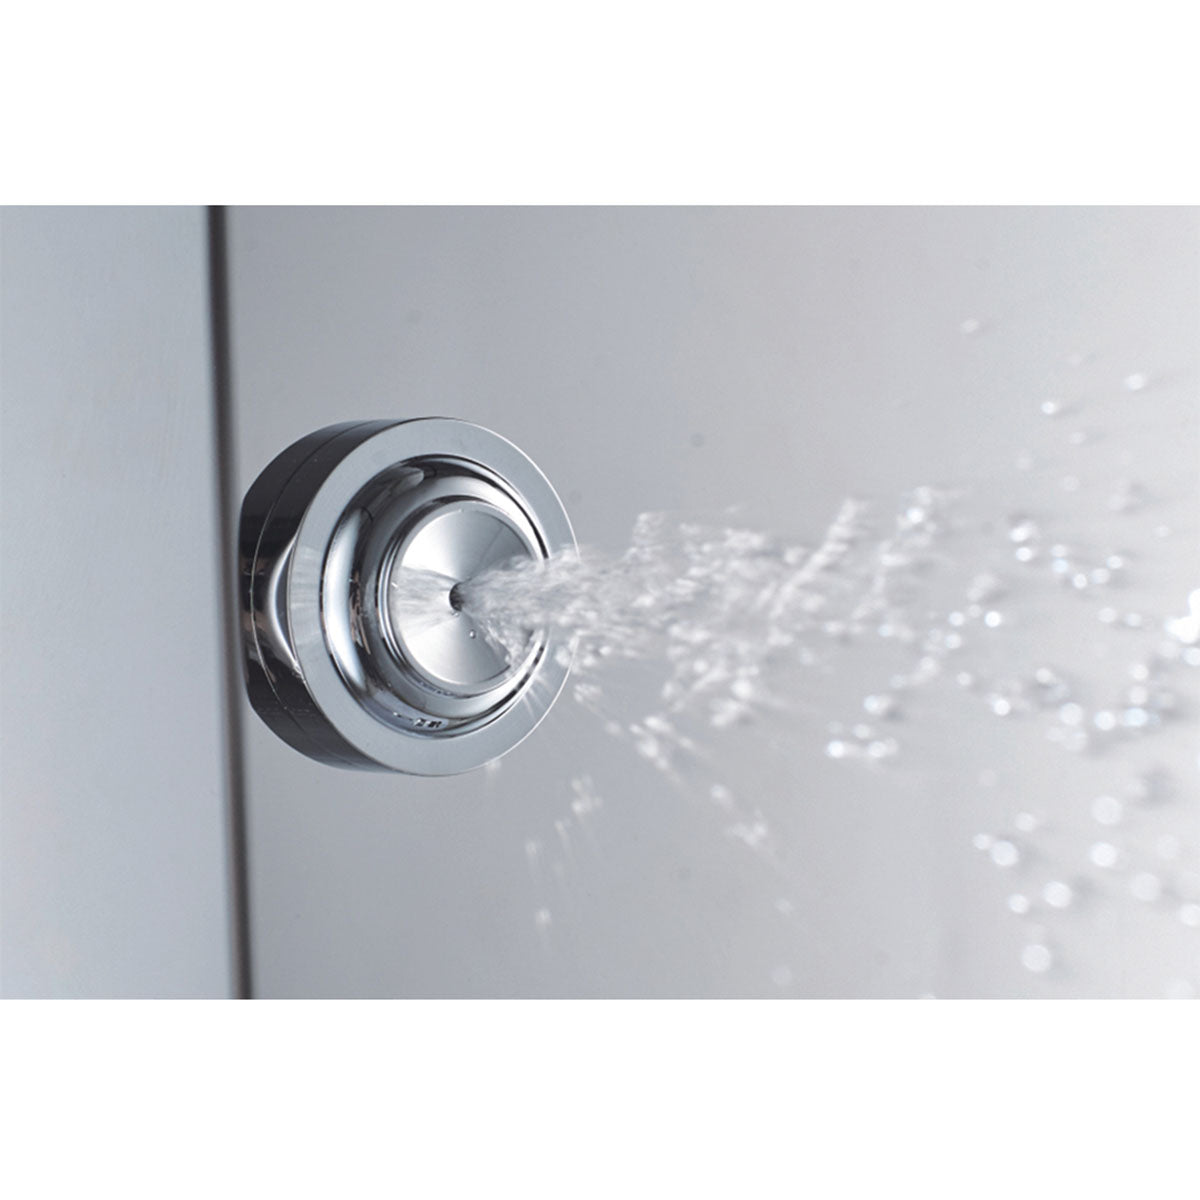 SP-5568 Stainless Steel Shower Panel (Chrome) - iStyle Bath